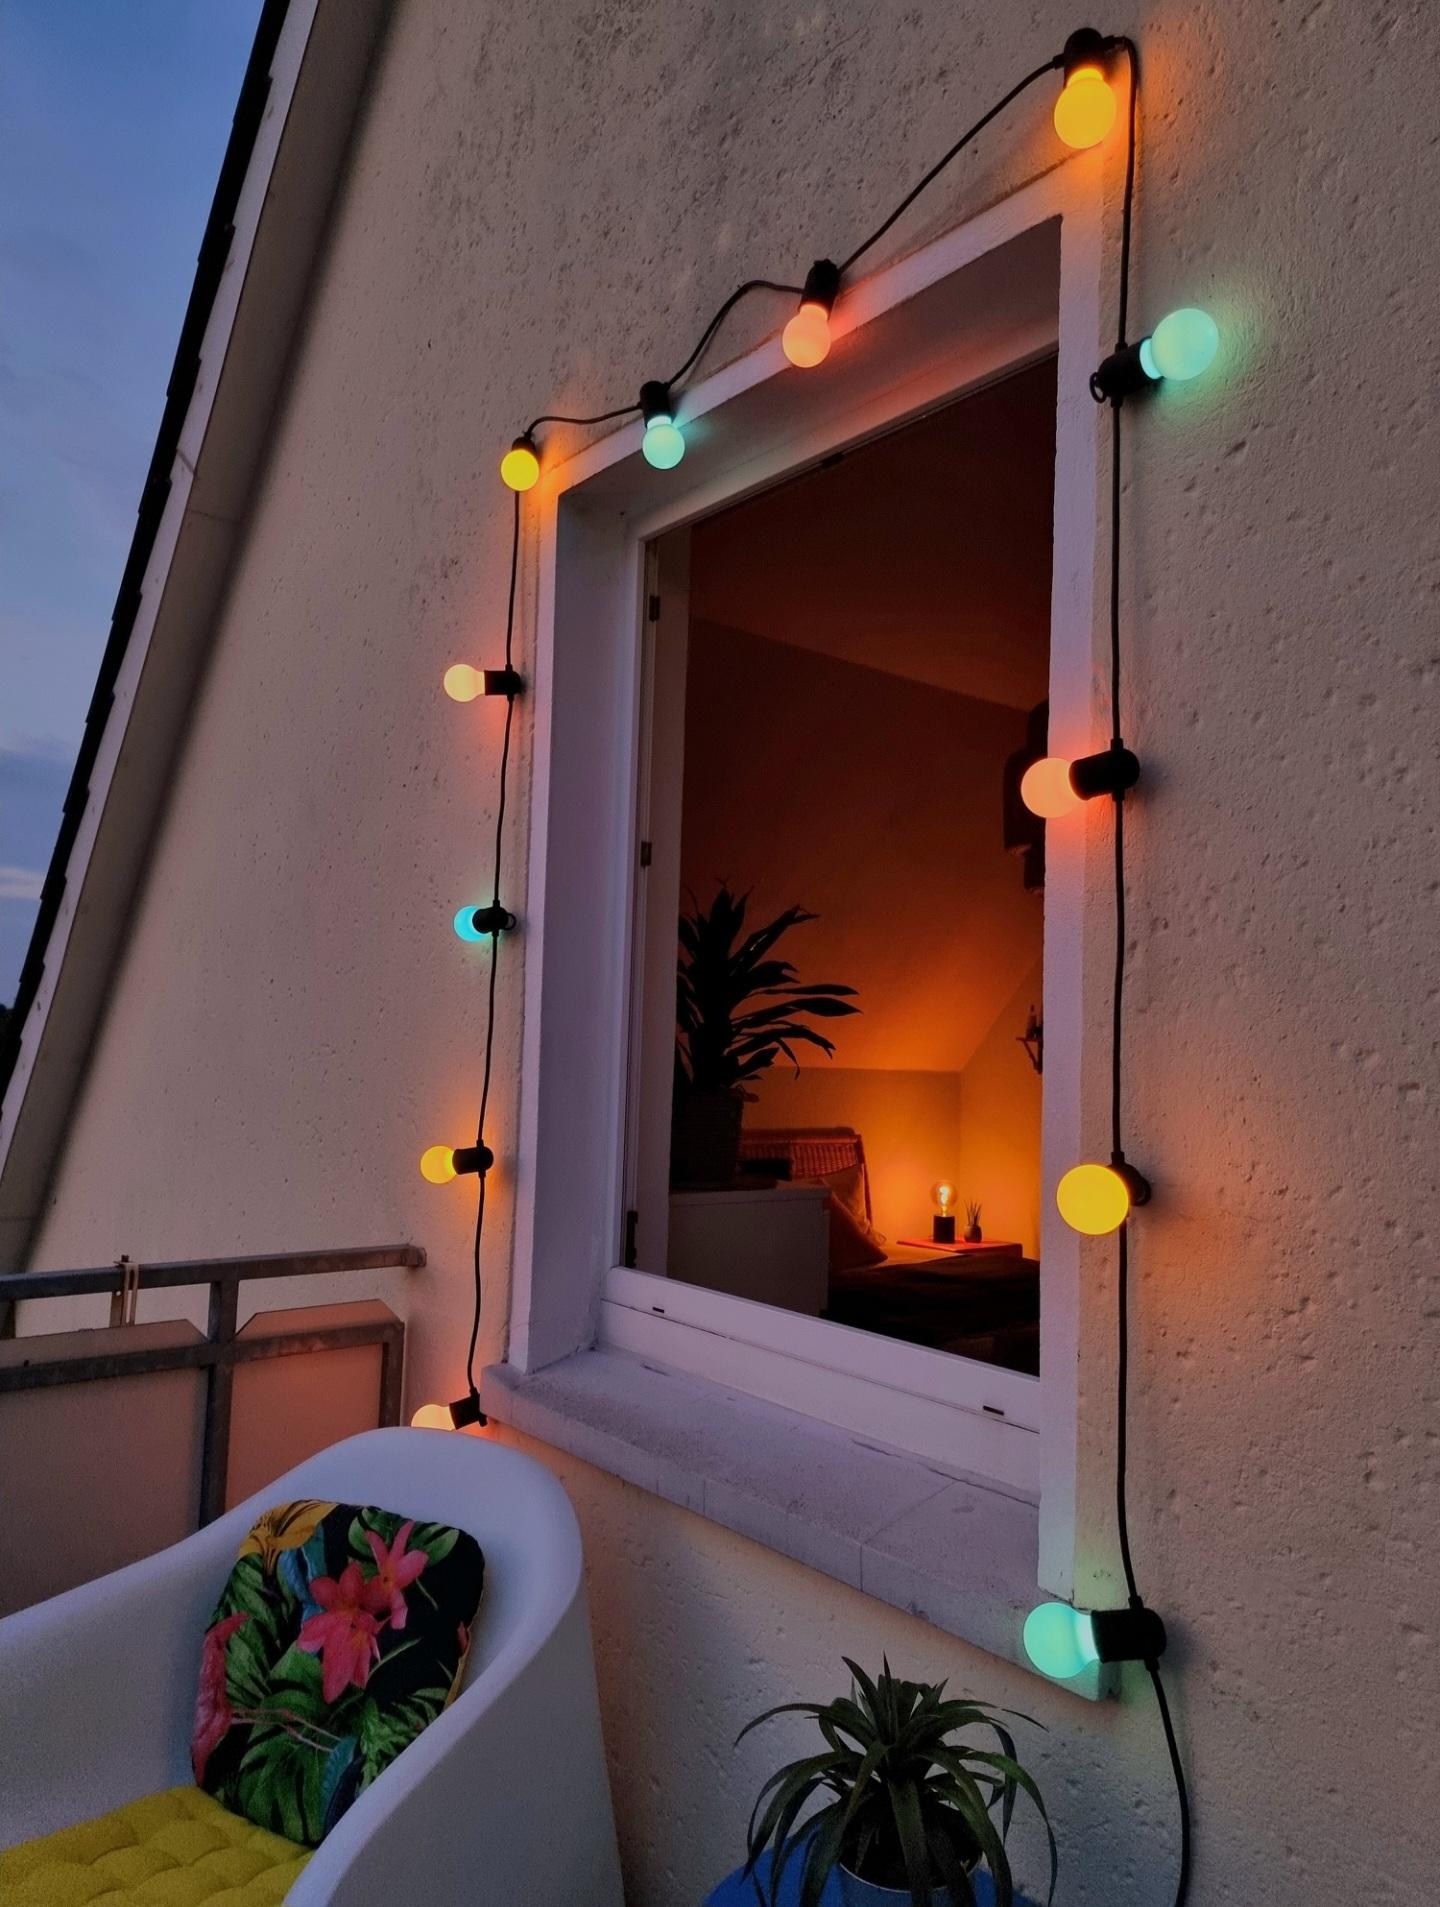 #Sommer ,ich fühle dich🧡😇 #Balkon #Outdoor #Lichterkette #cosy #colorfulhome #Ikea #Outdoor #chillmode #interior 